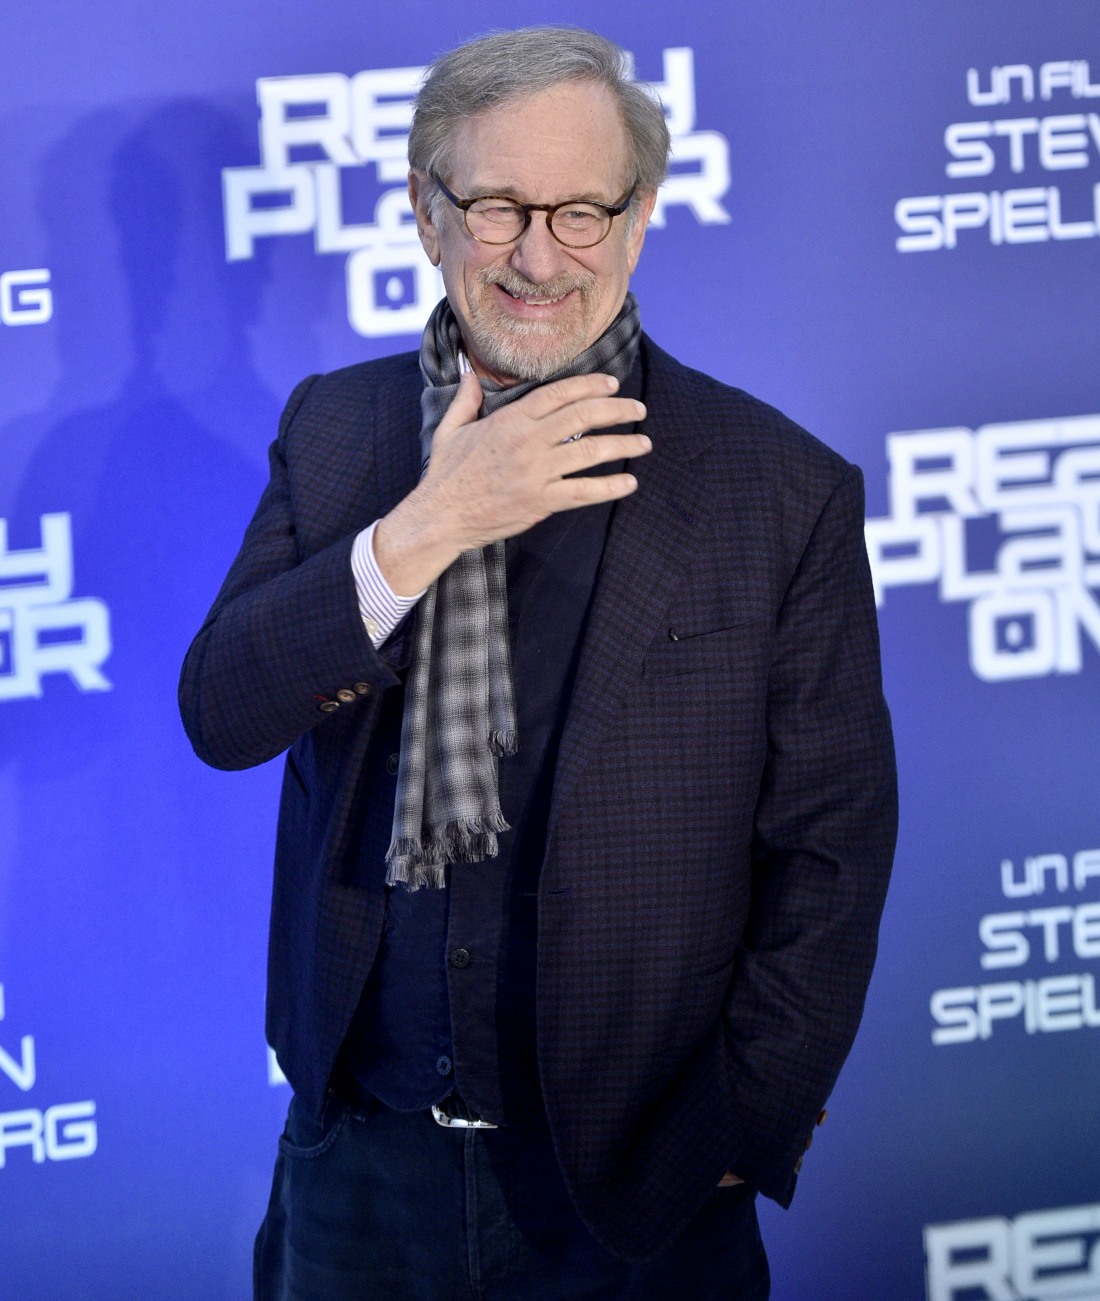 Steven Spielberg attends the photocall for 'Ready Player One'